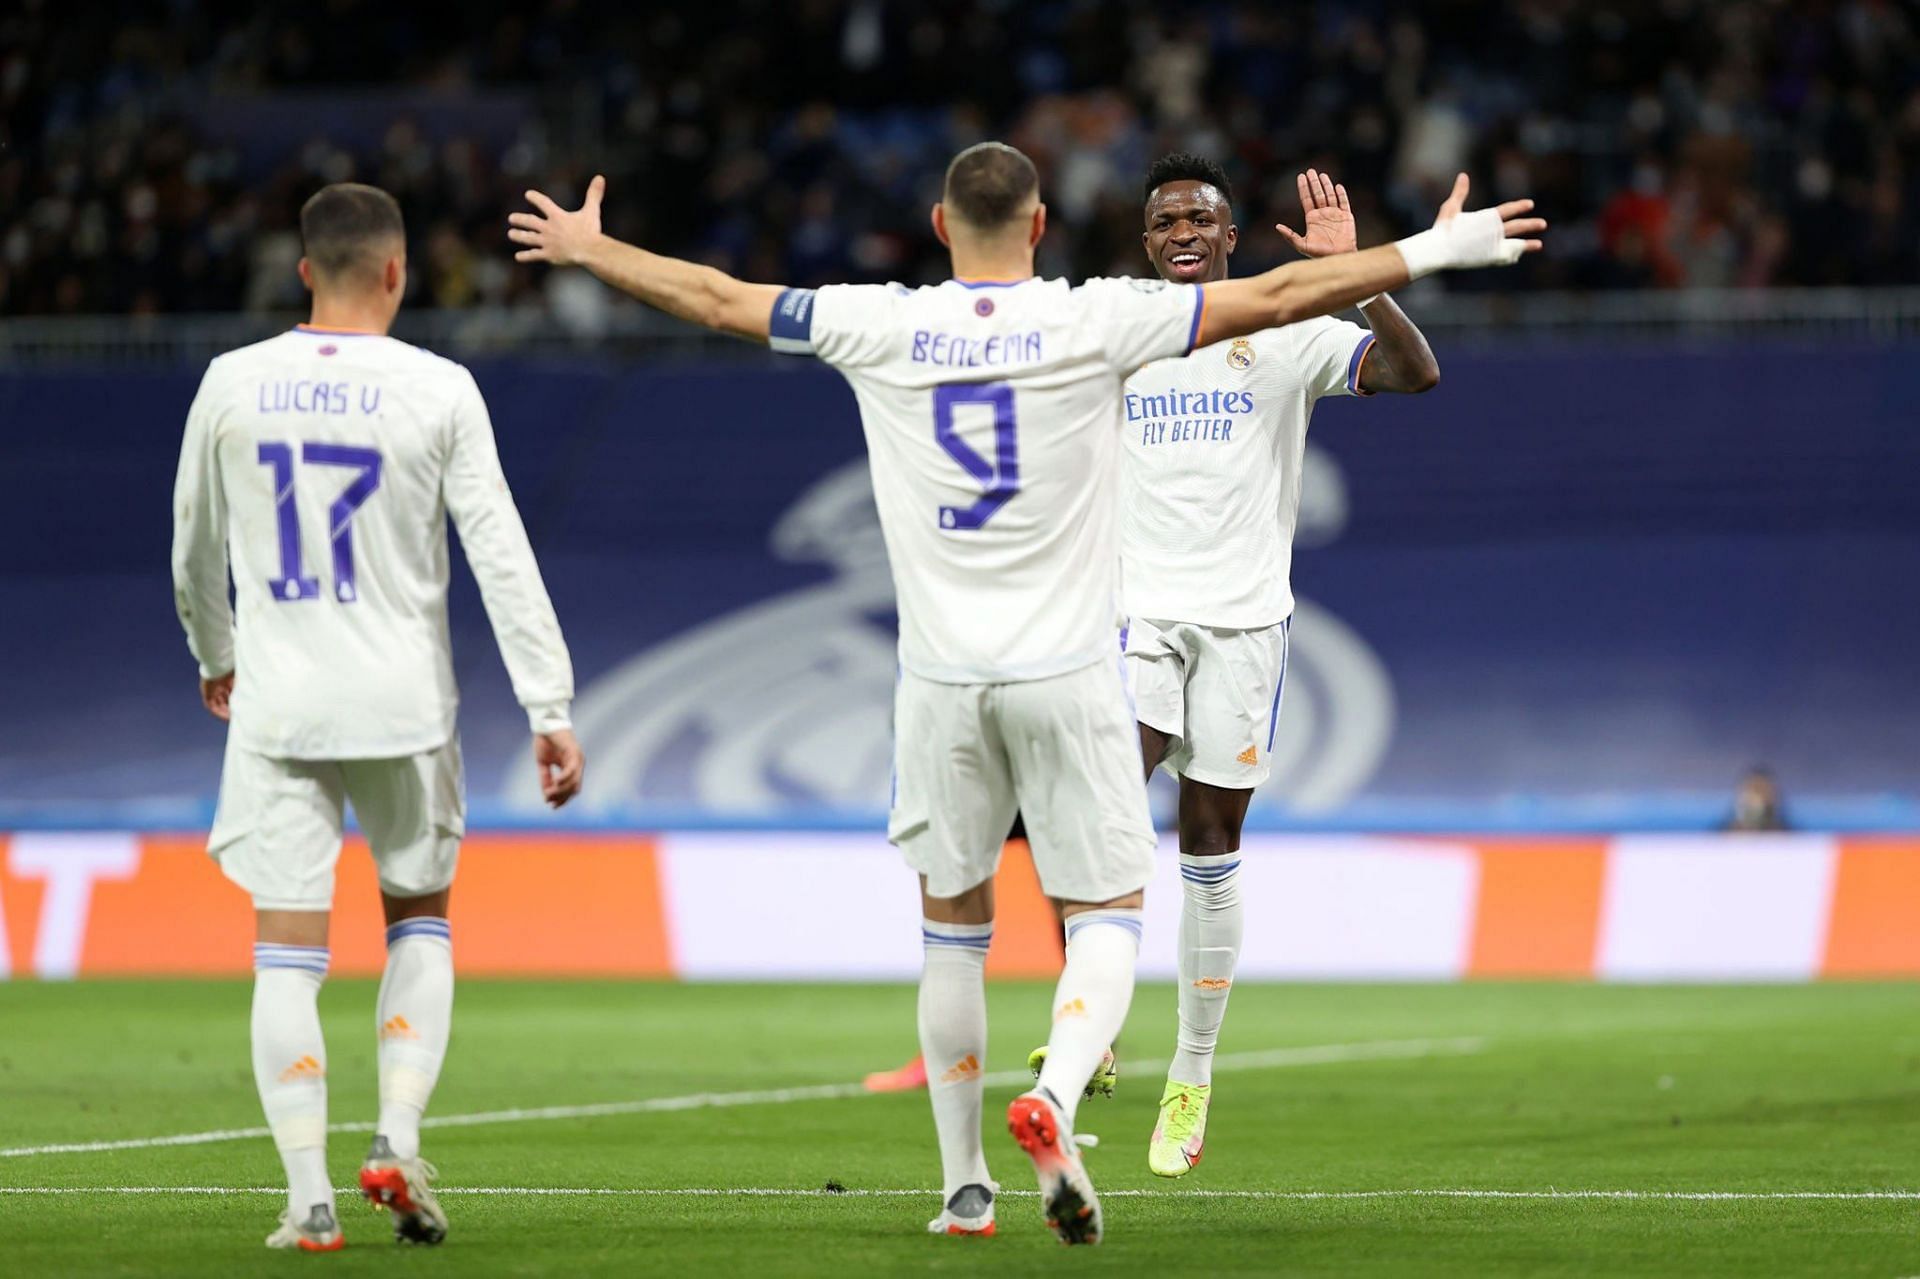 Real Madrid defeated Shakhtar Donetsk 2-1 in the Champions League